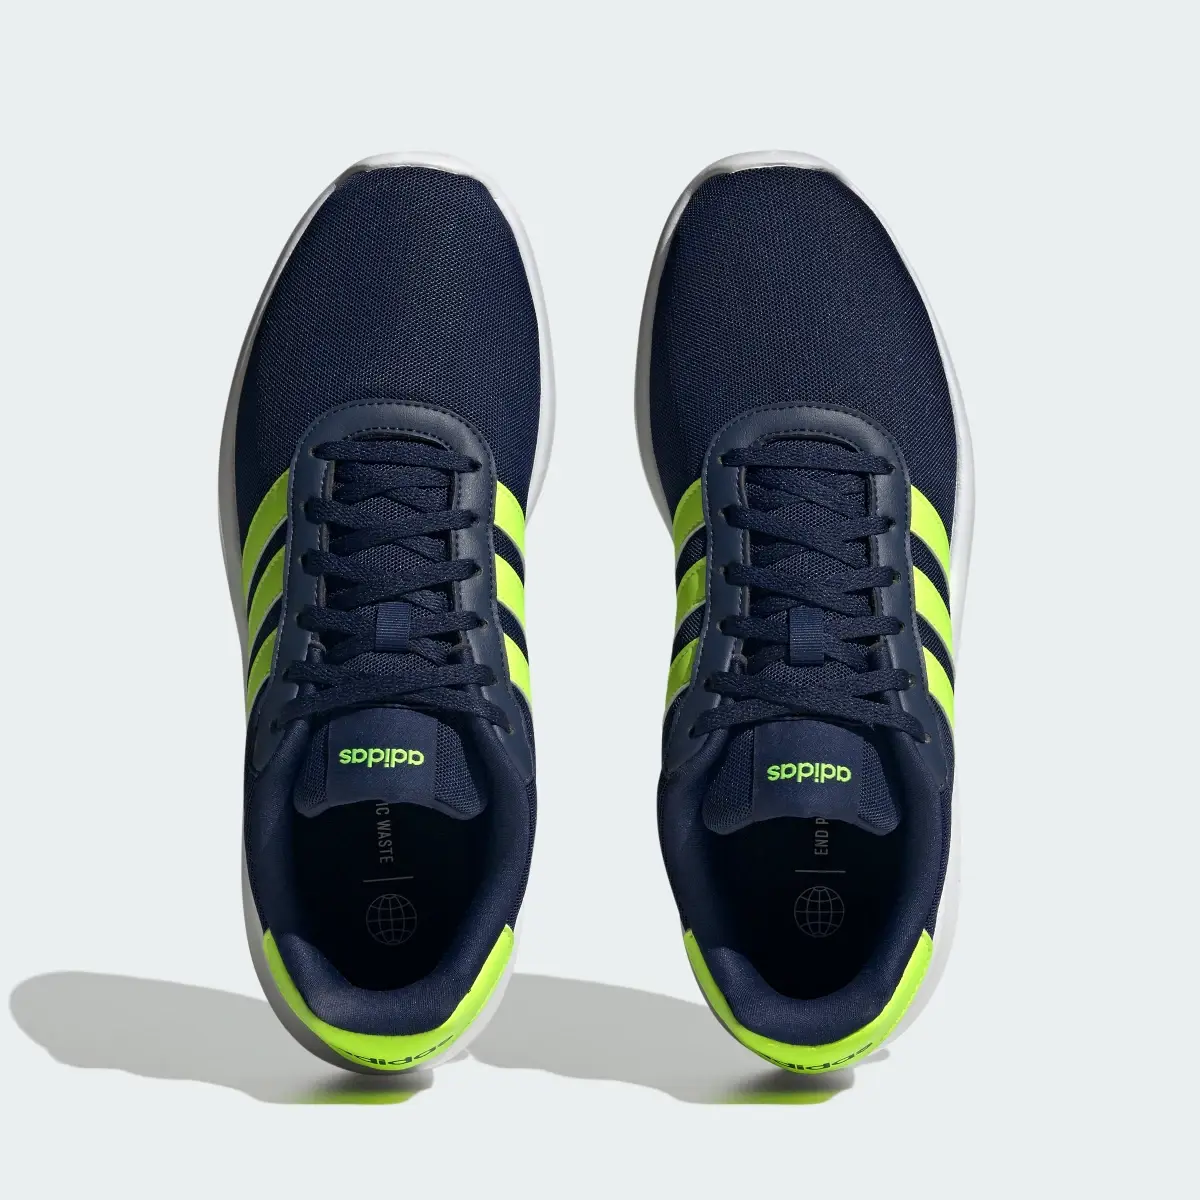 Adidas Lite Racer 3.0 Shoes. 3